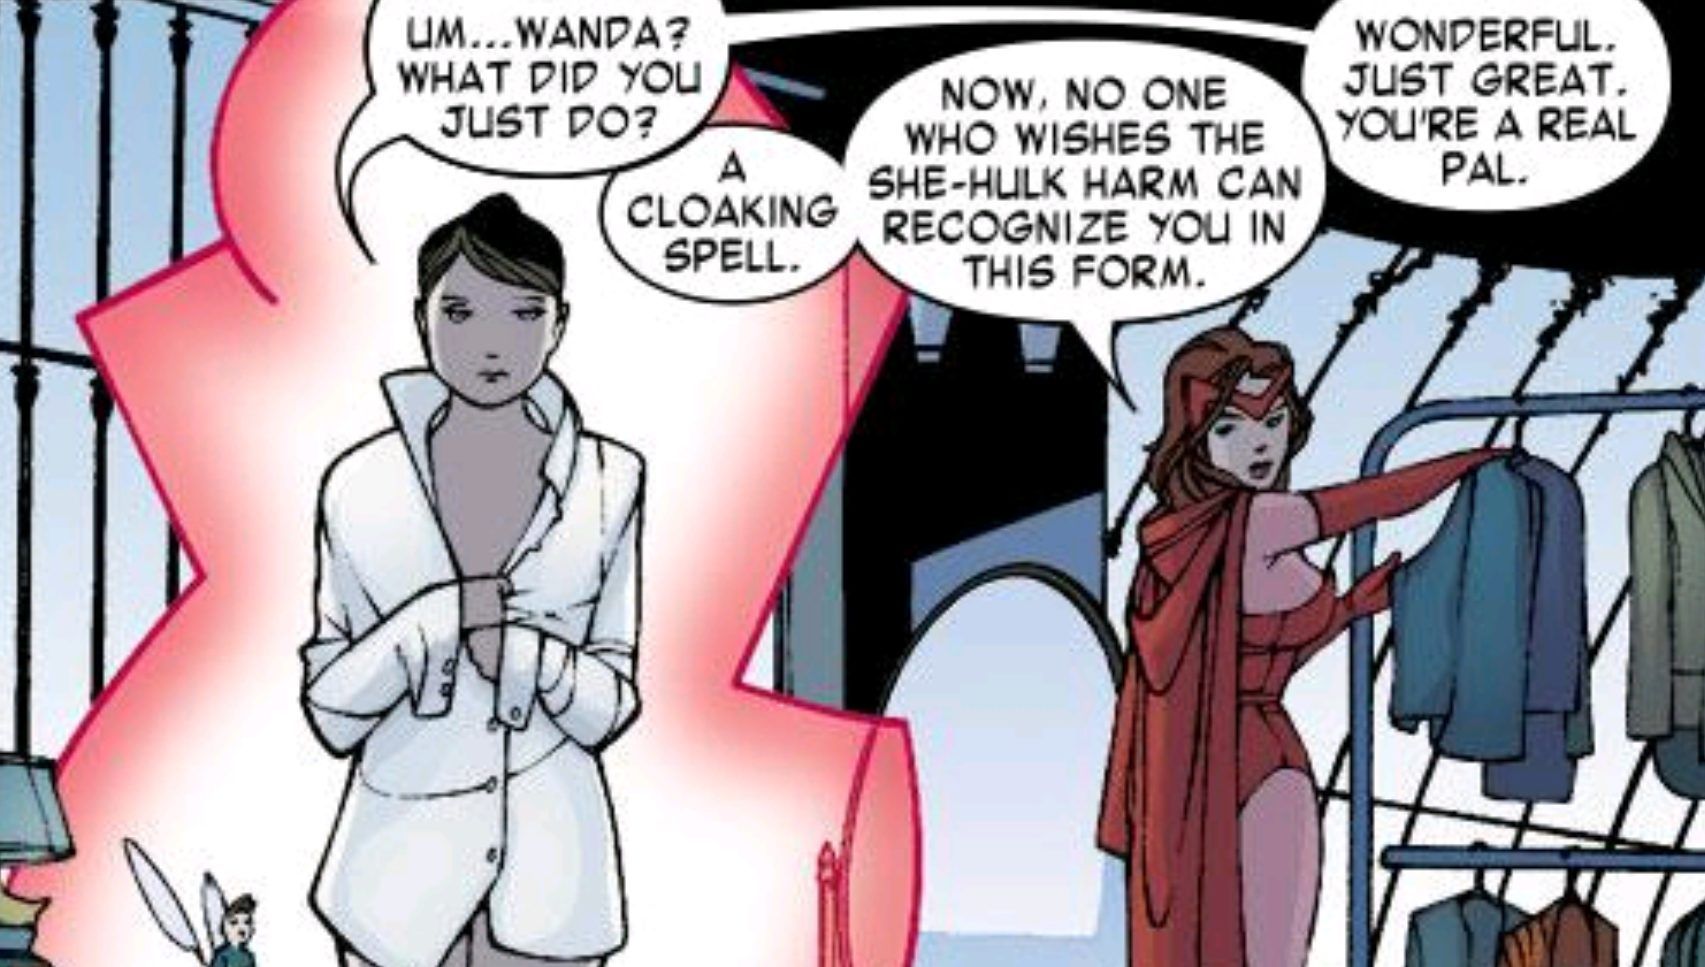 She-Hulk and Scarlet Witch